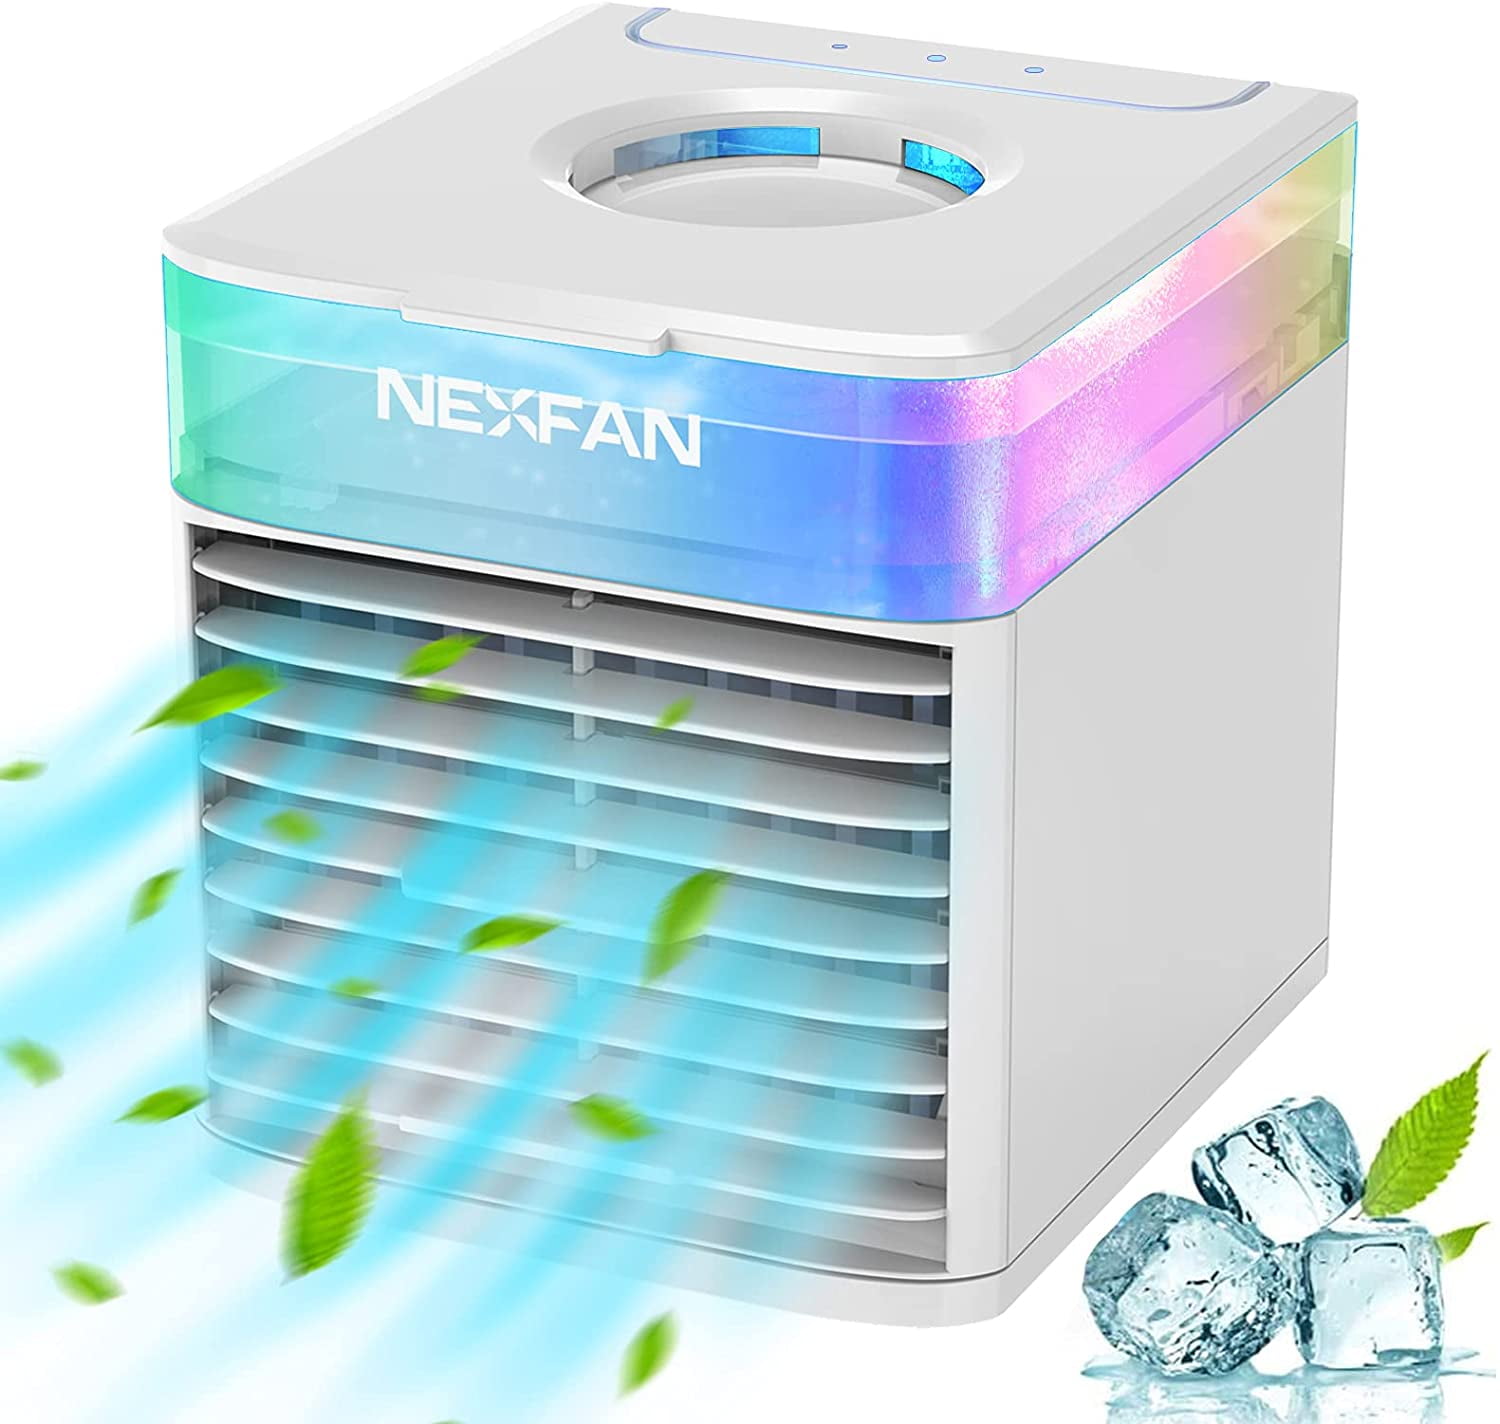 Mini Personal Air Cooler Fan with 3 Speed Mode Portable Air Conditioner Fan Office and Room and USB Input & 7 Colors Night Light Small Humidifier Air Cooler Desk Table Fan Handle for Home